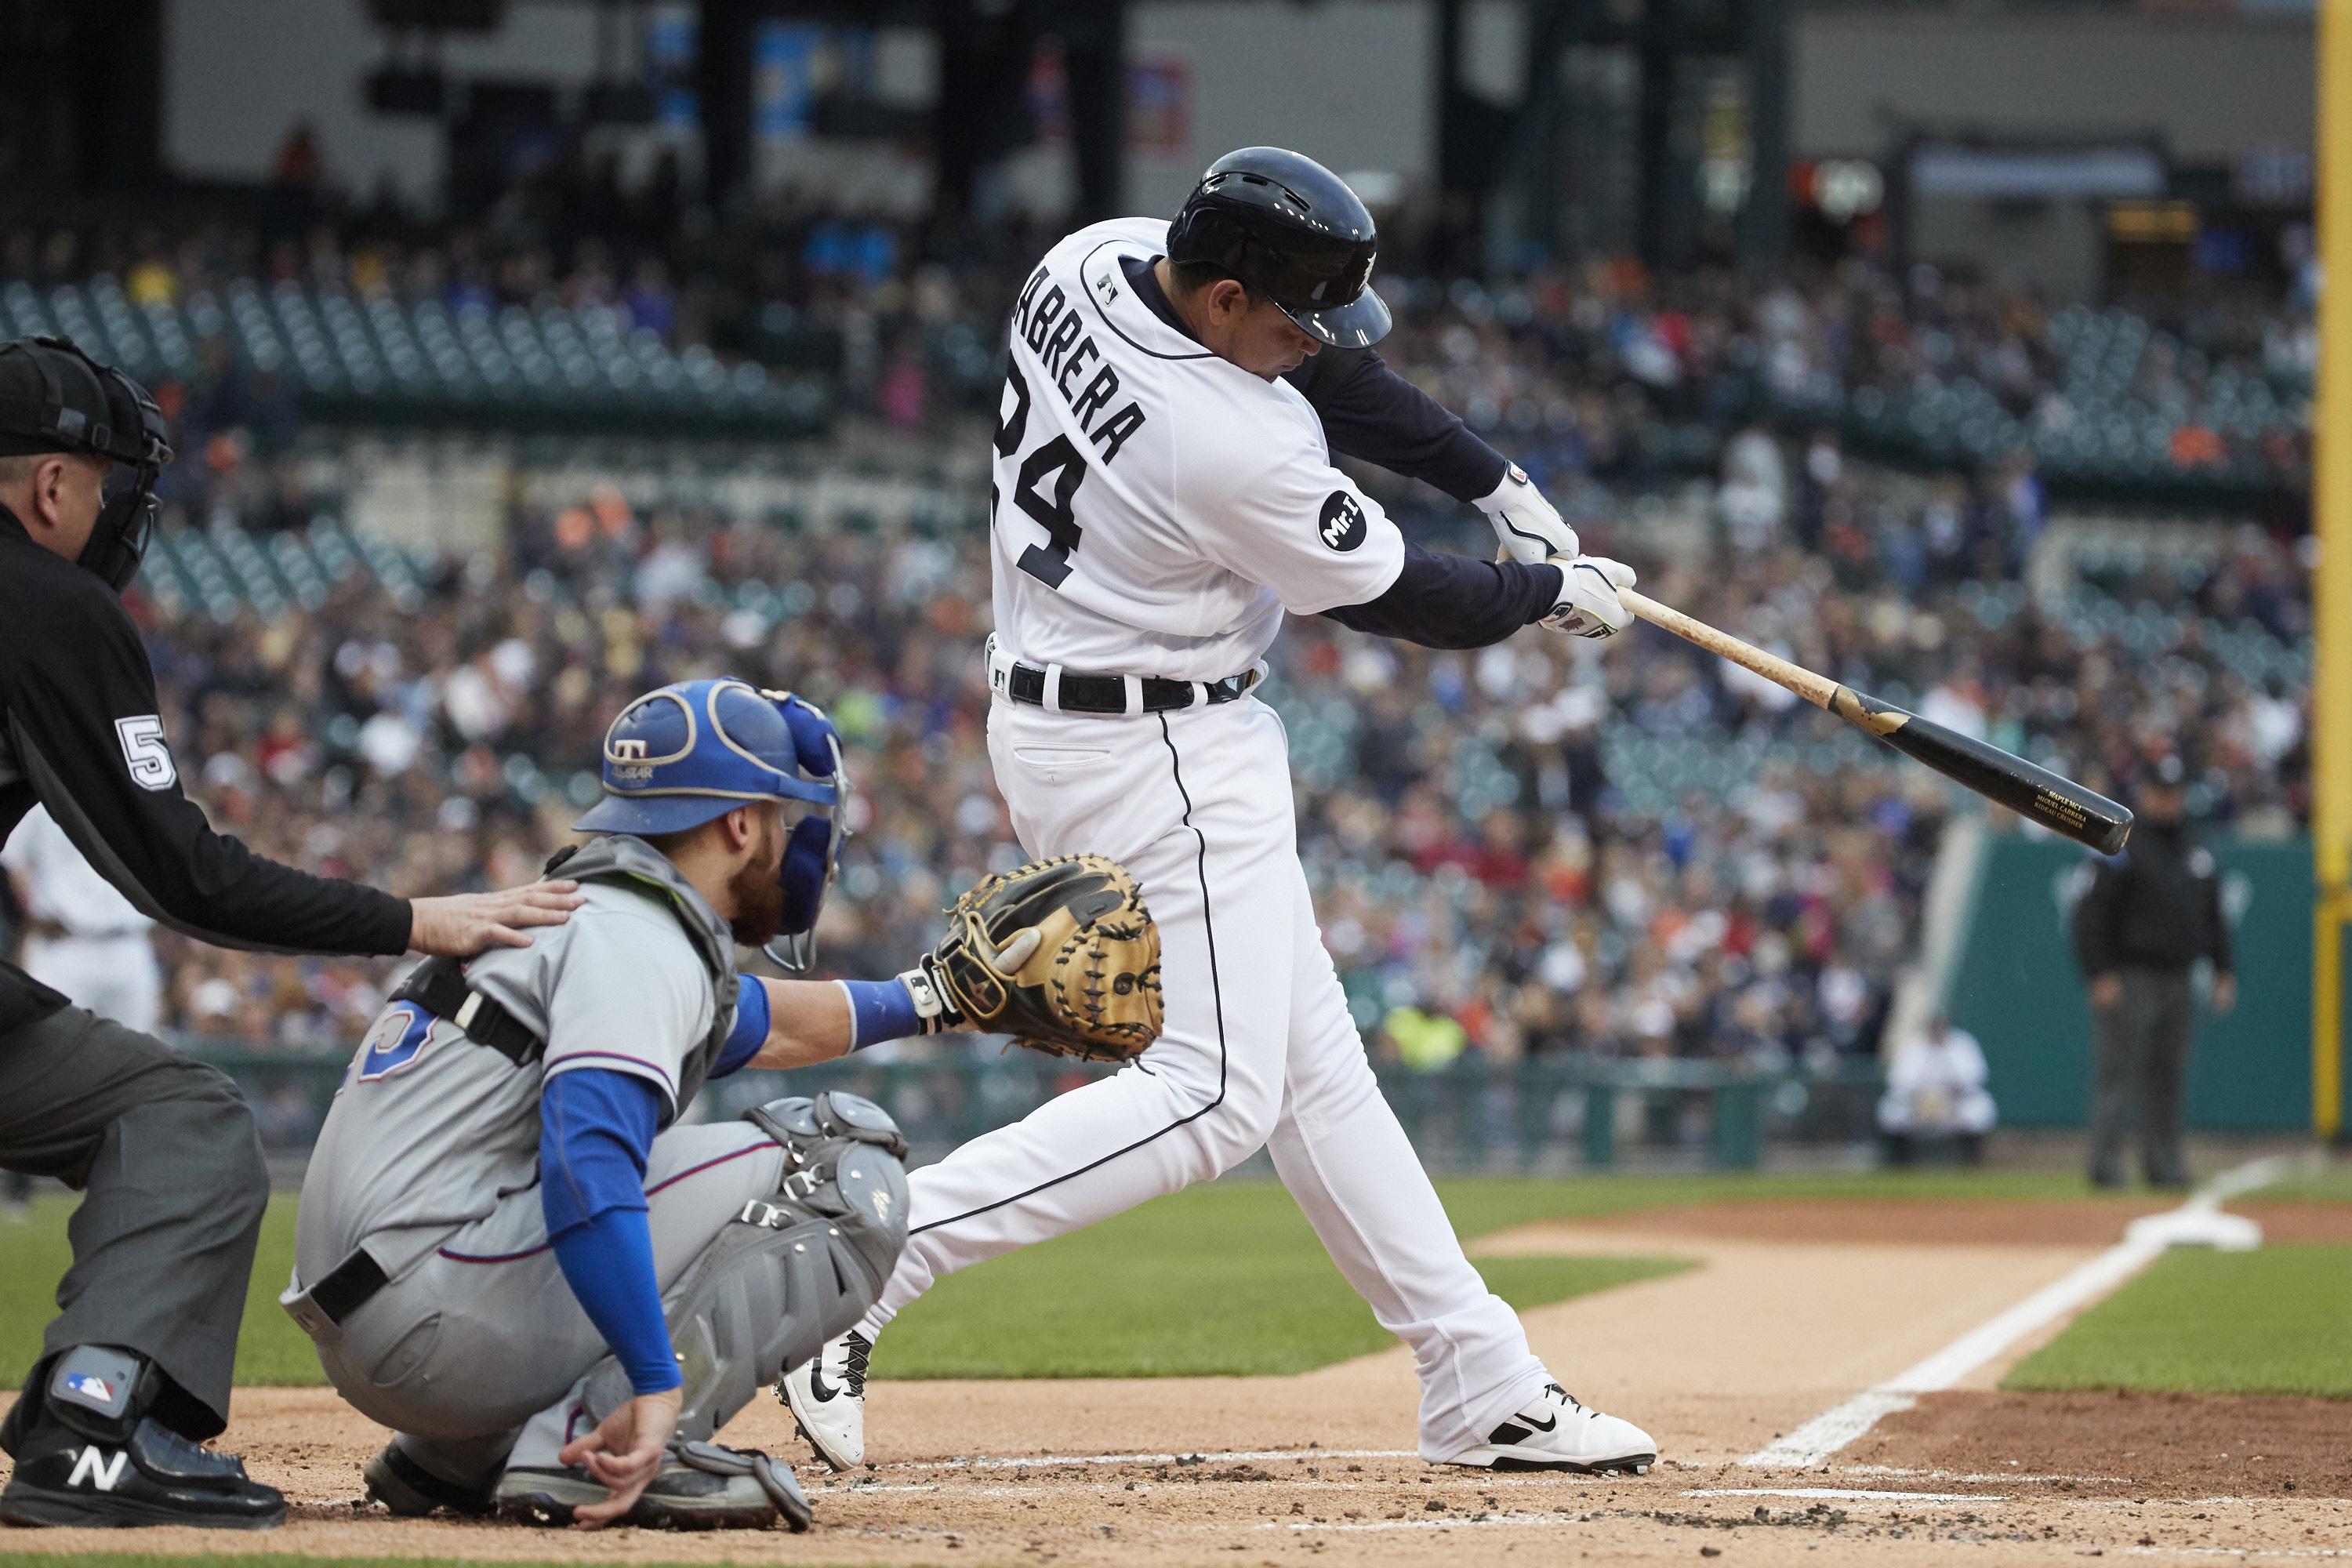 Detroit Tigers: Things to improve, things to maintain for playoff push